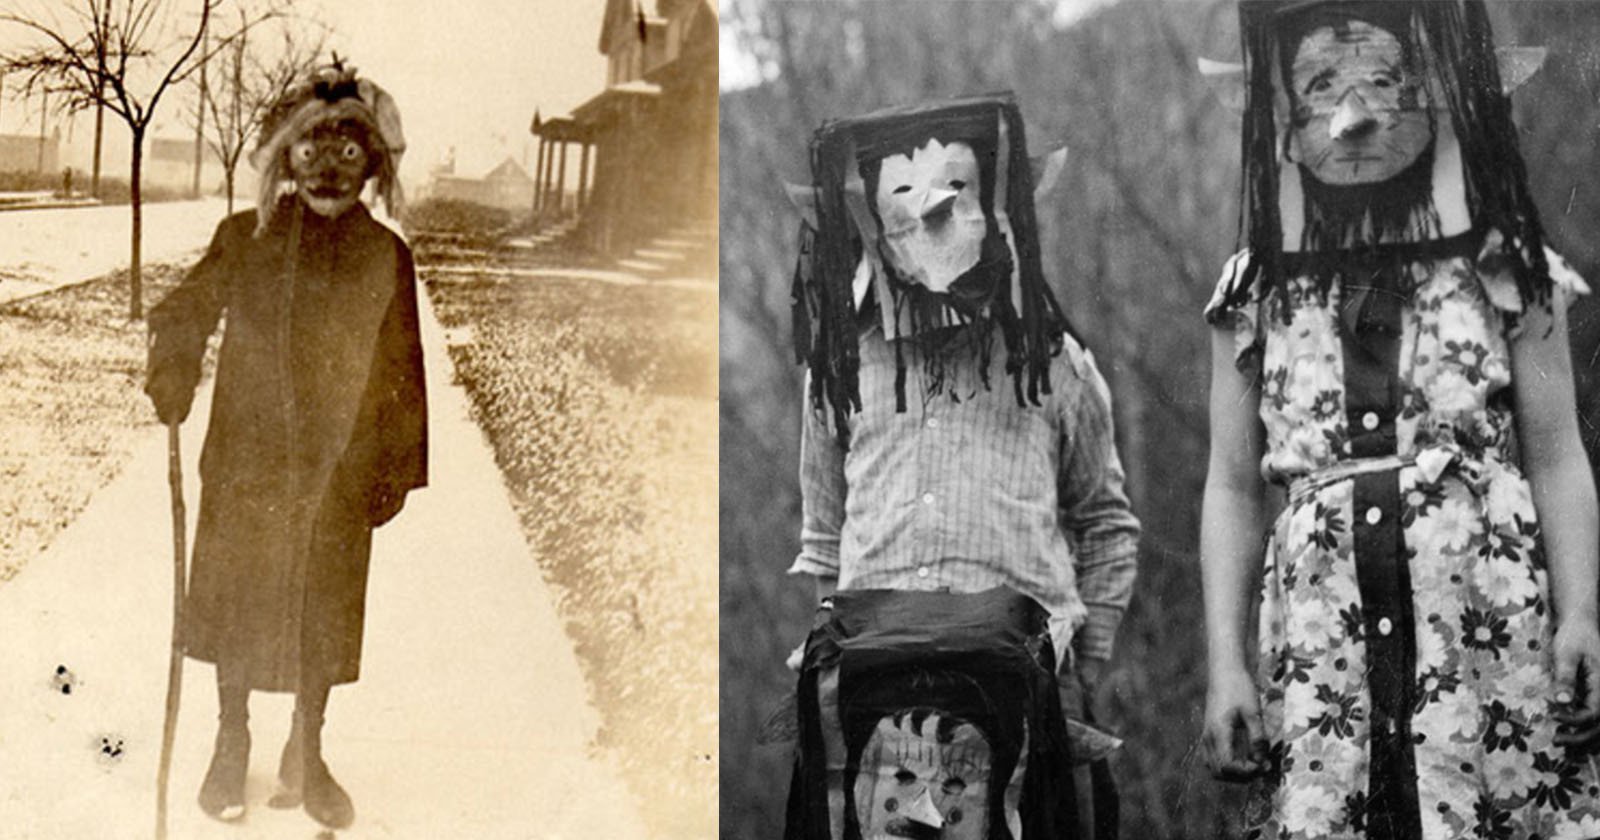 Century-Old Photos of Spooky Vintage Halloween Costumes